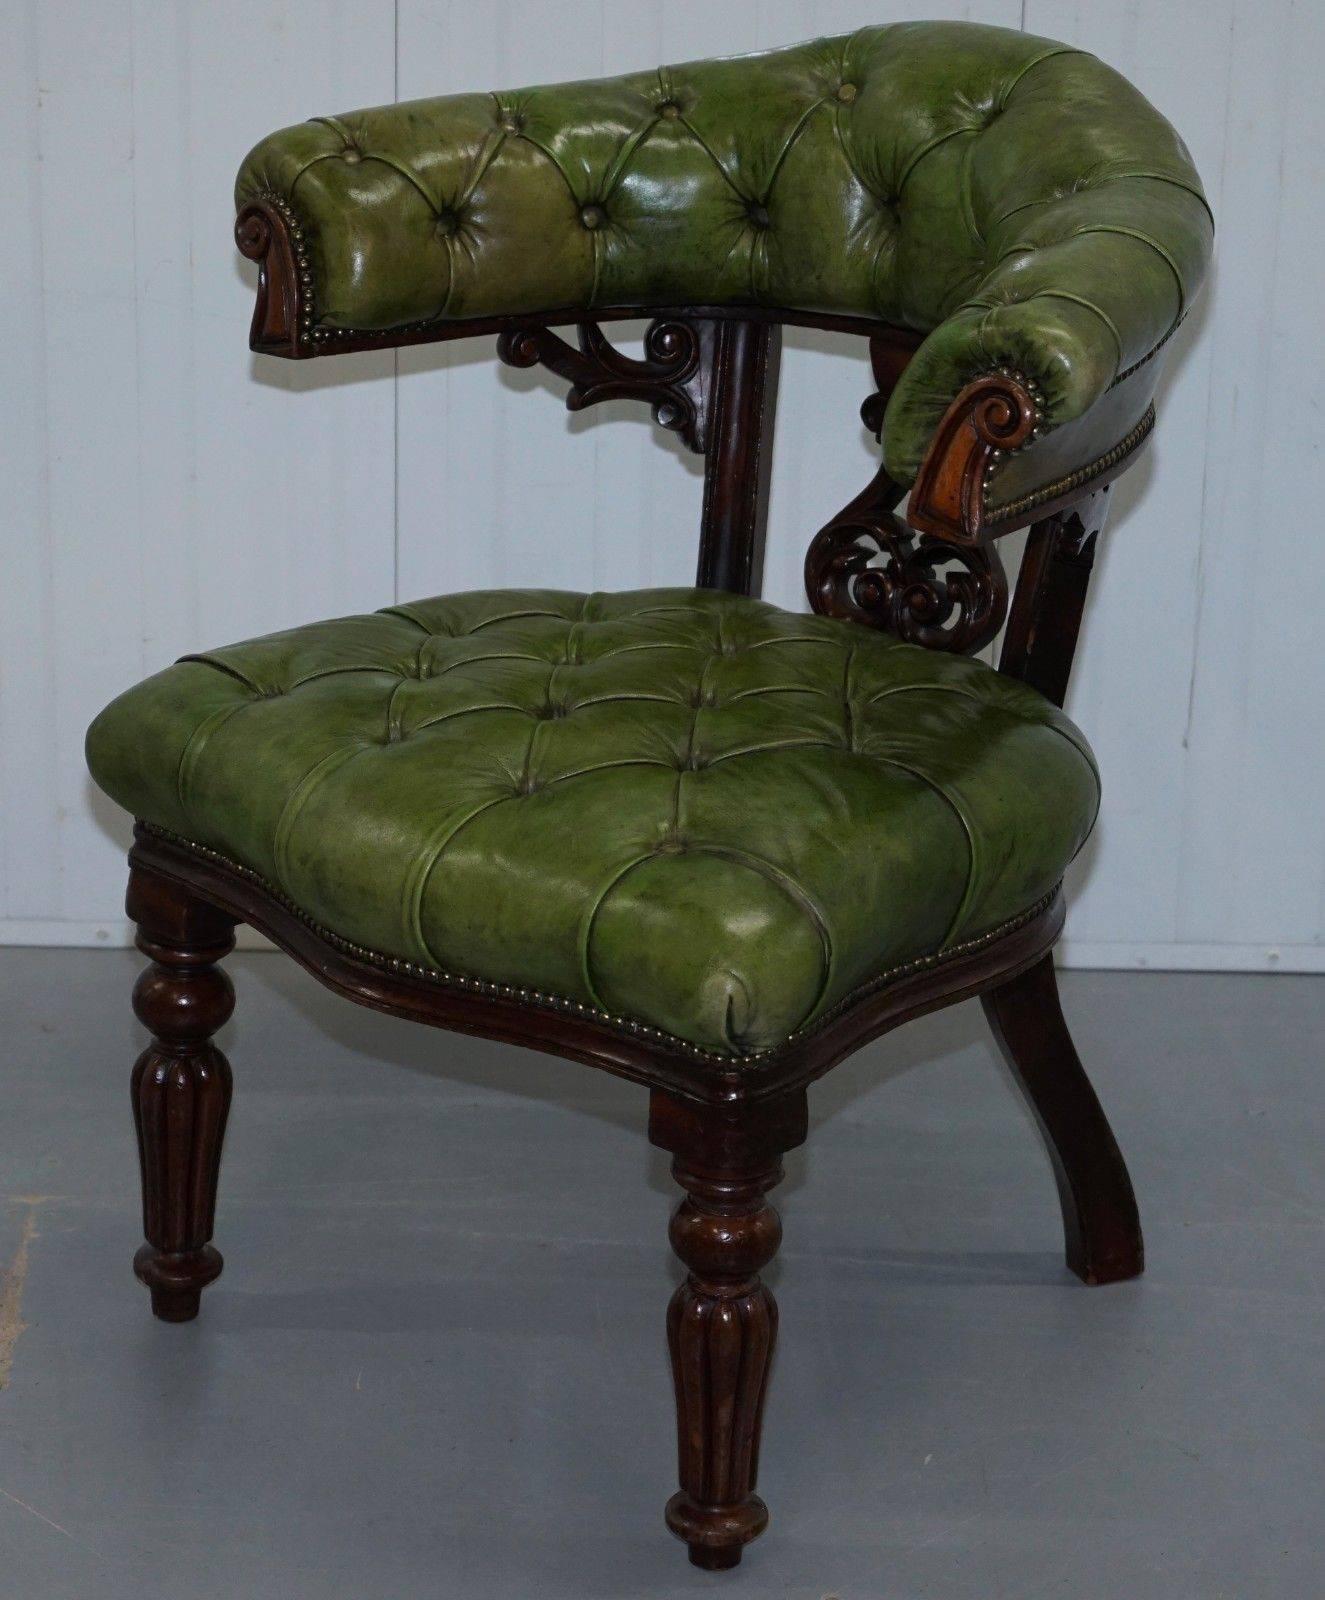 We are delighted to offer for sale this very large Victorian 1860 solid mahogany framed with Chesterfield buttoning and aged green leather upholstery Horseshoe library reading captain’s chair

A very grand and well made piece, these first came to